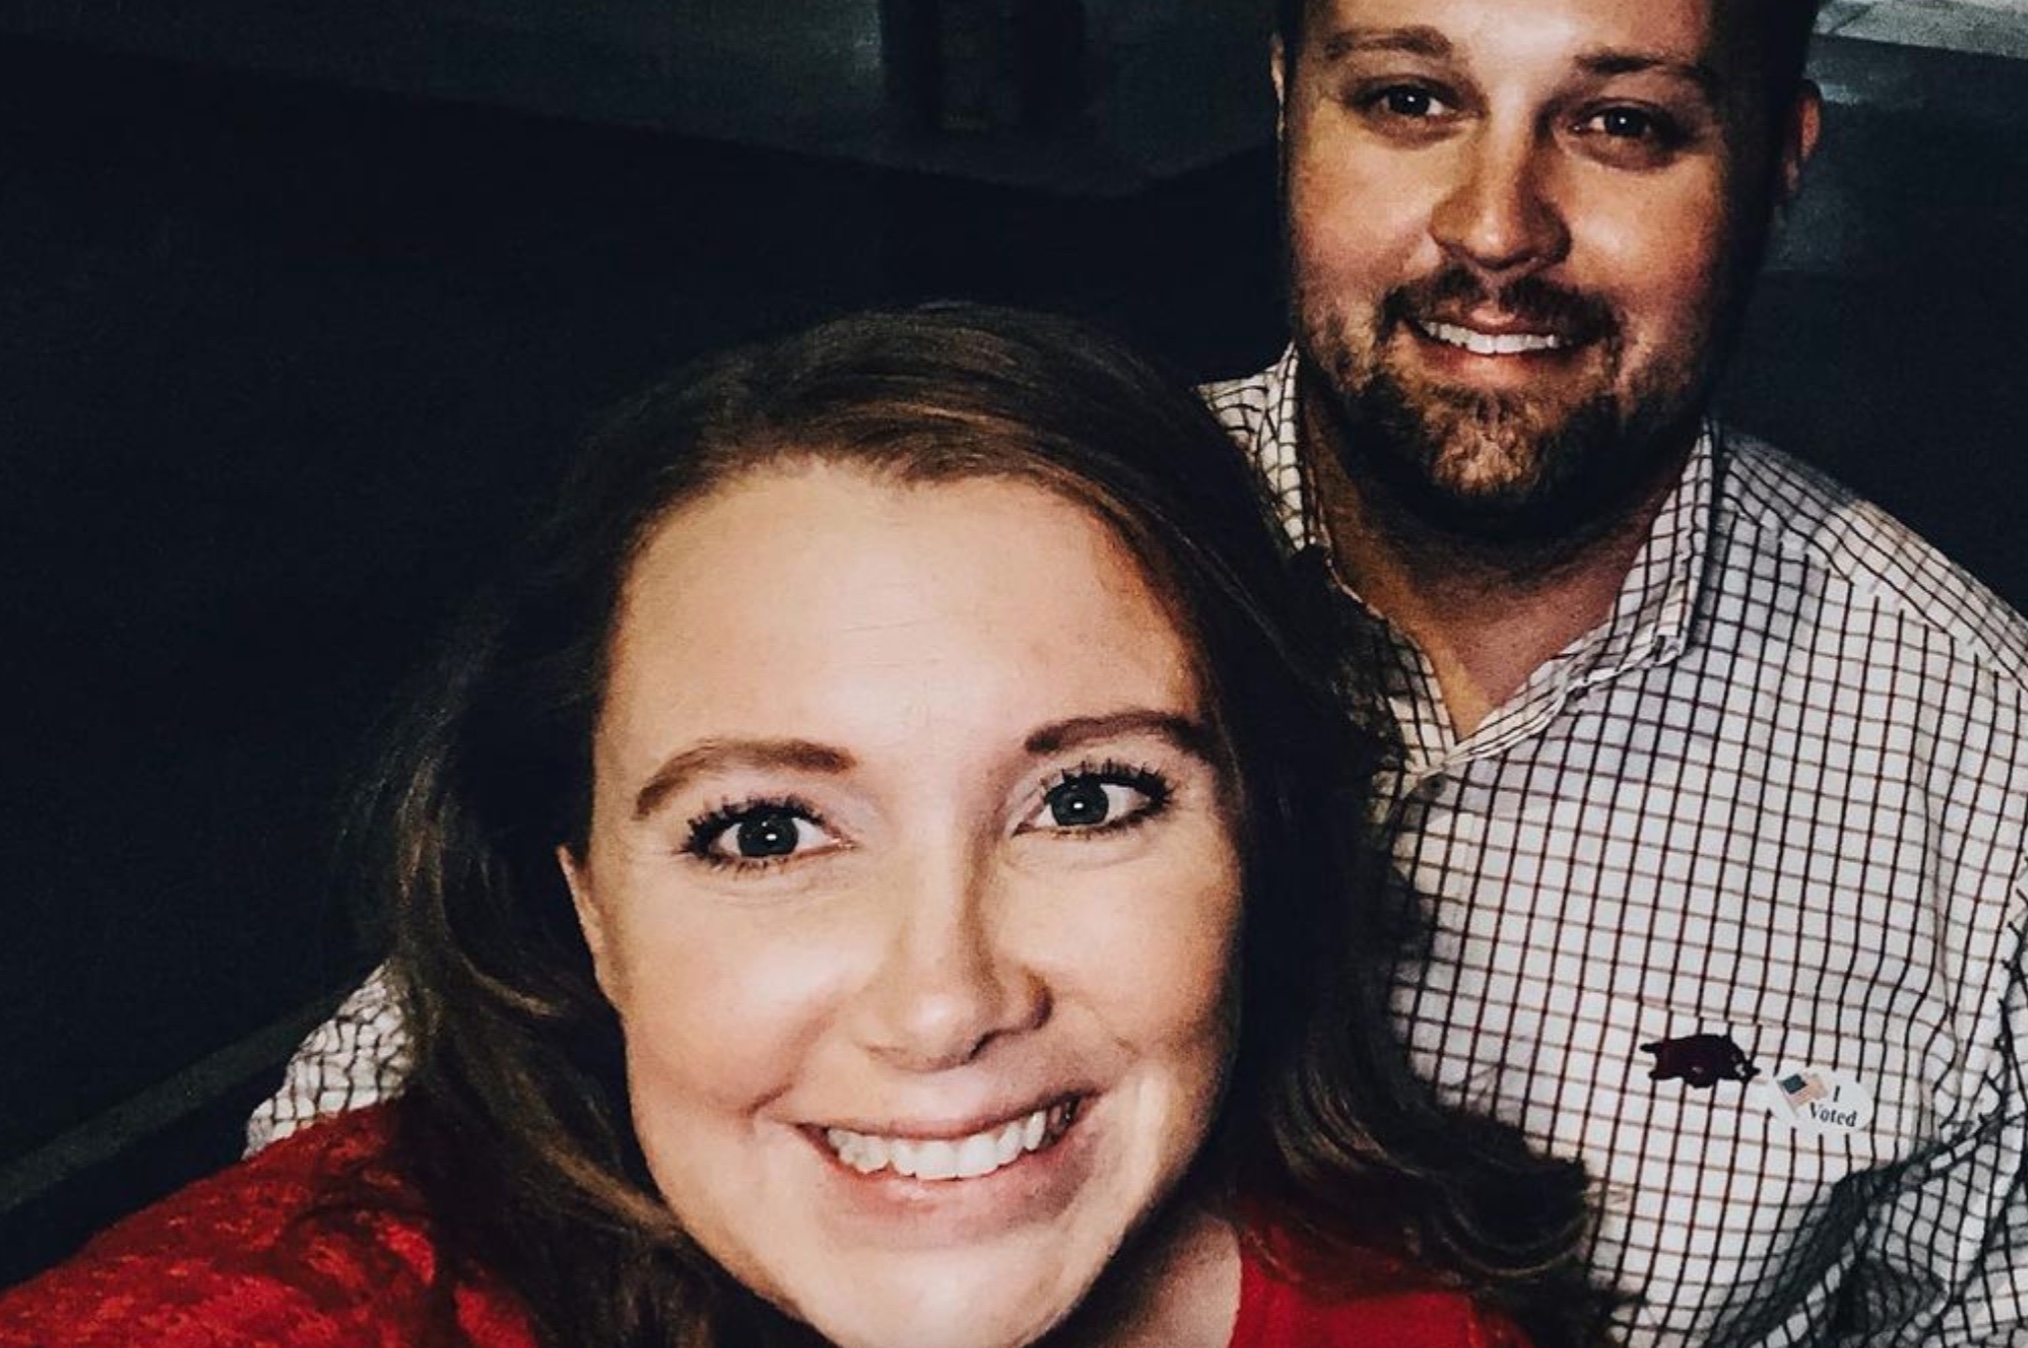 New Information About Josh Duggar's Time in Solitary Confinement Revealed | Nearly one week to the day it was revealed that Josh Duggar had been put into solitary confinement and his release date was pushed nearly two months, new information is coming to light.